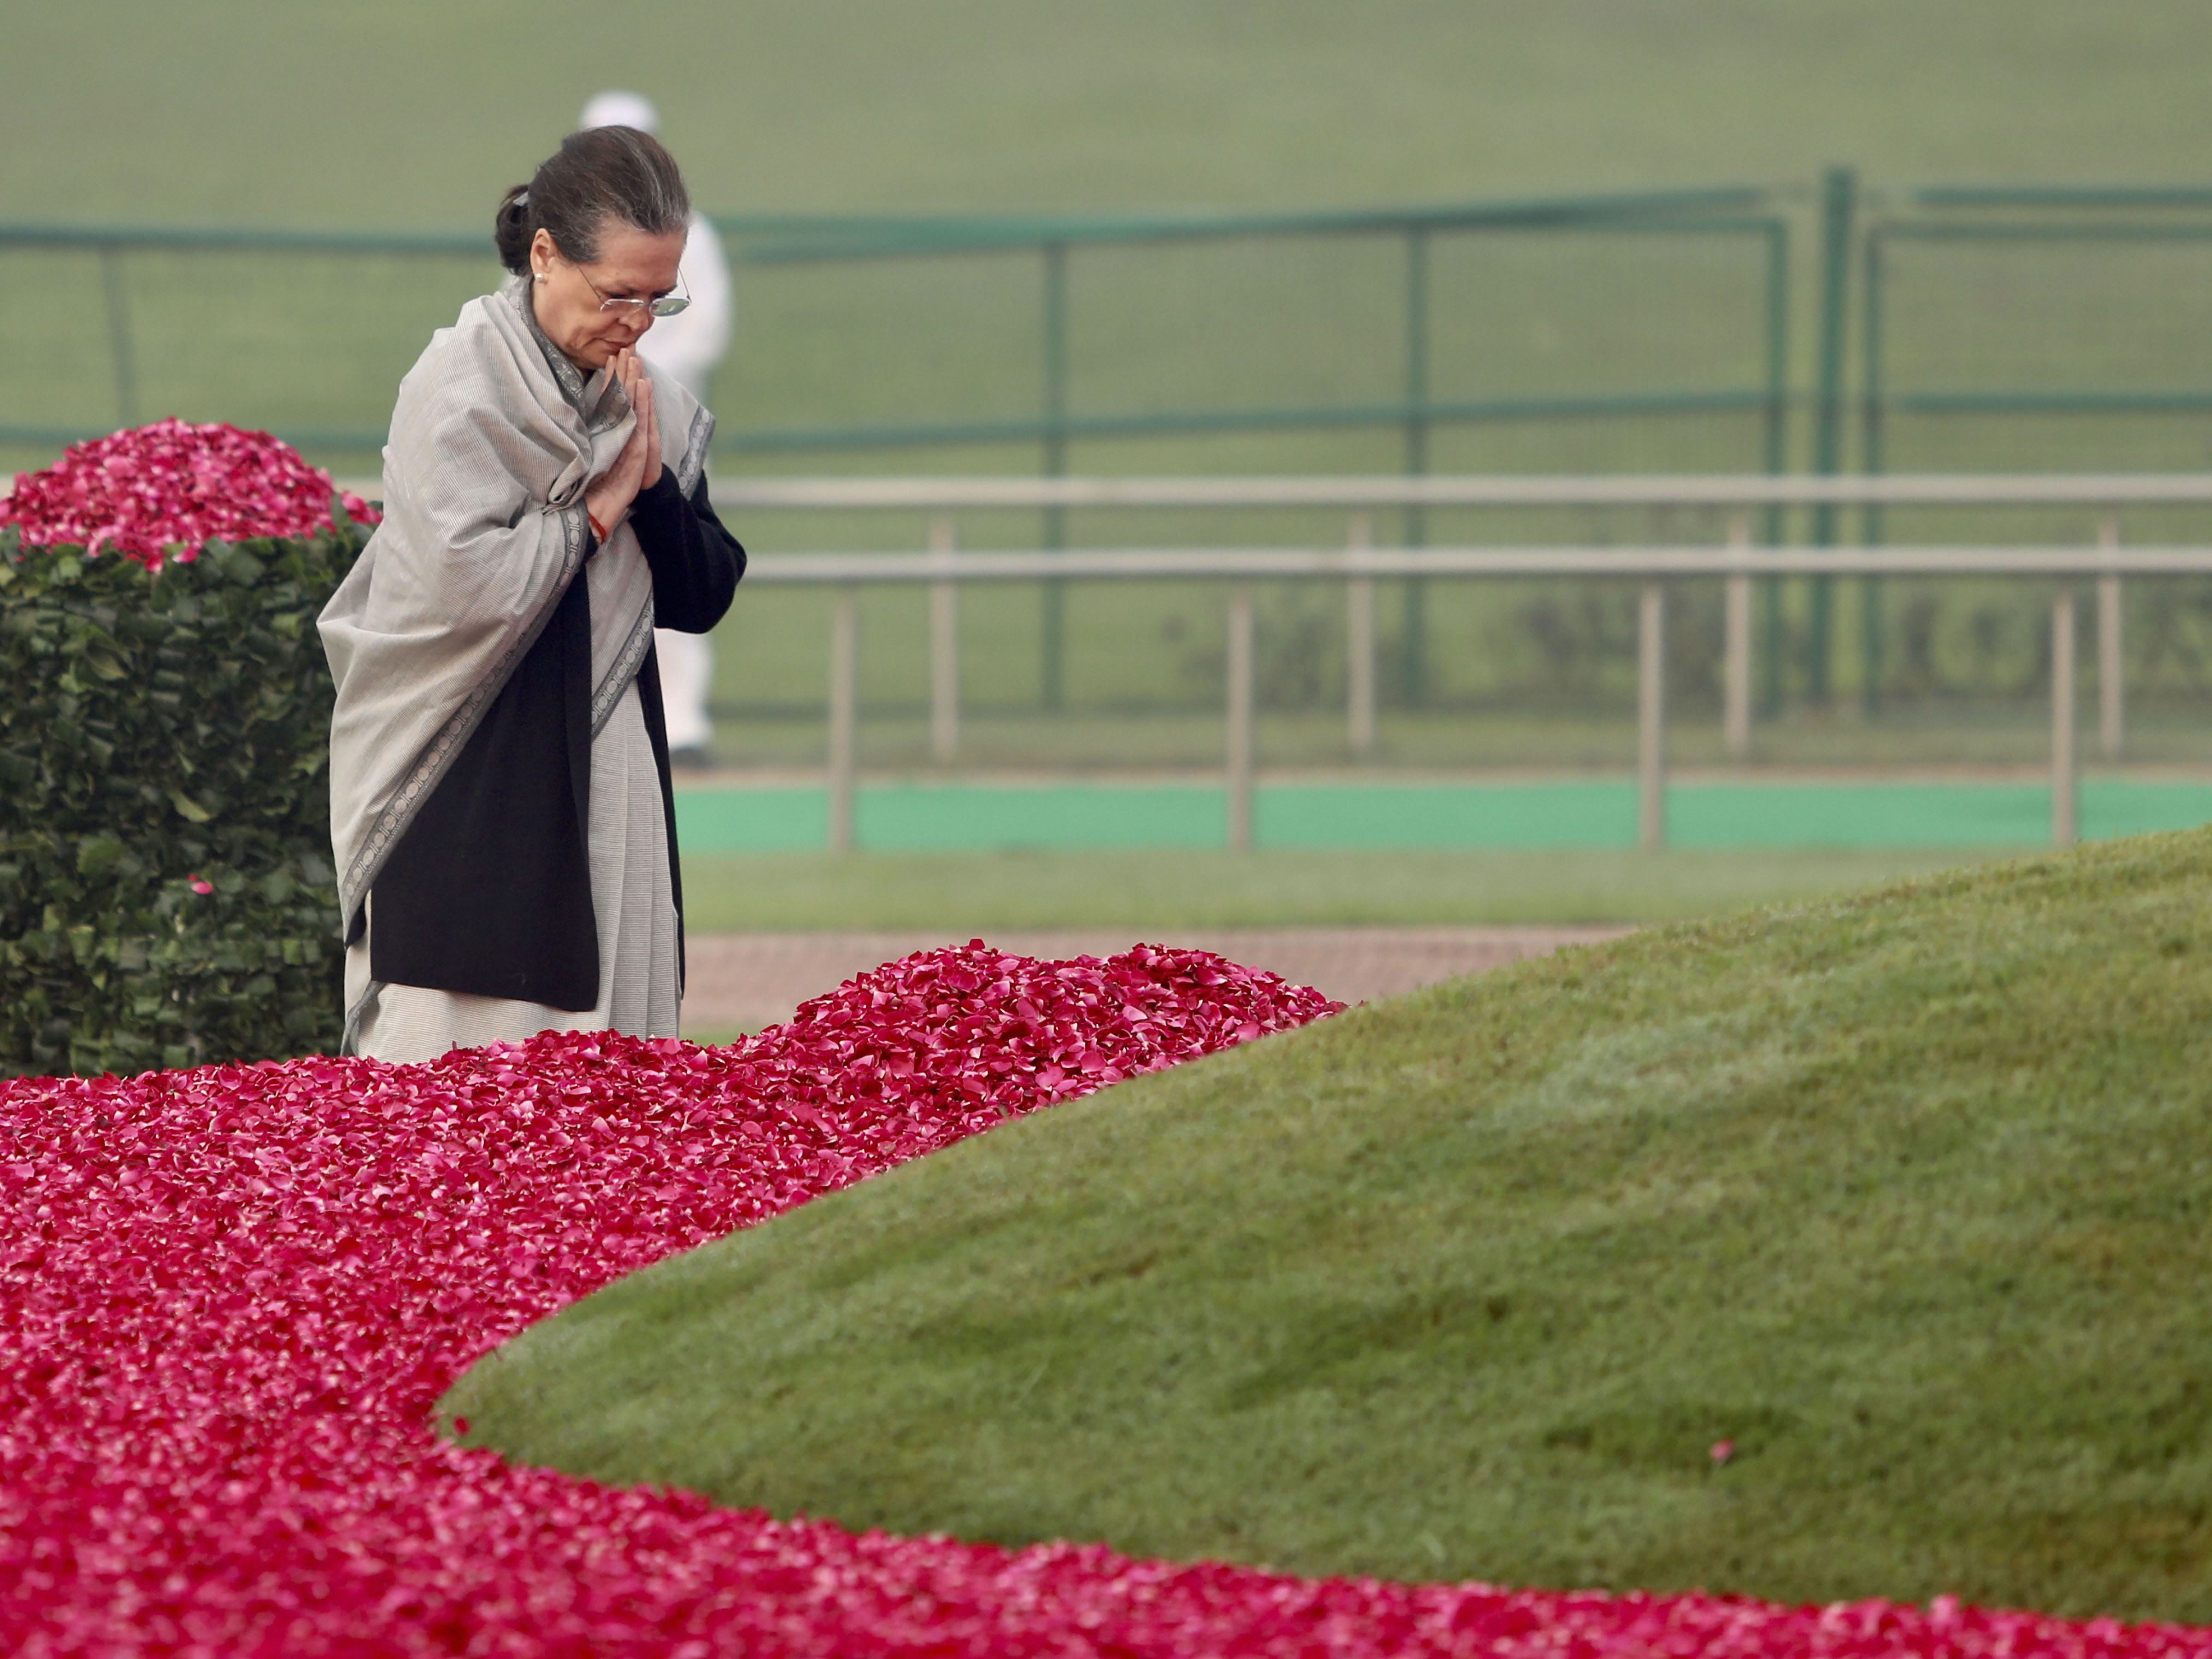 Congress President Sonia Gandhi pays floral tribute to India's first prime minister Jawaharlal Nehru on his birth anniversary at Shanti Van - PTI